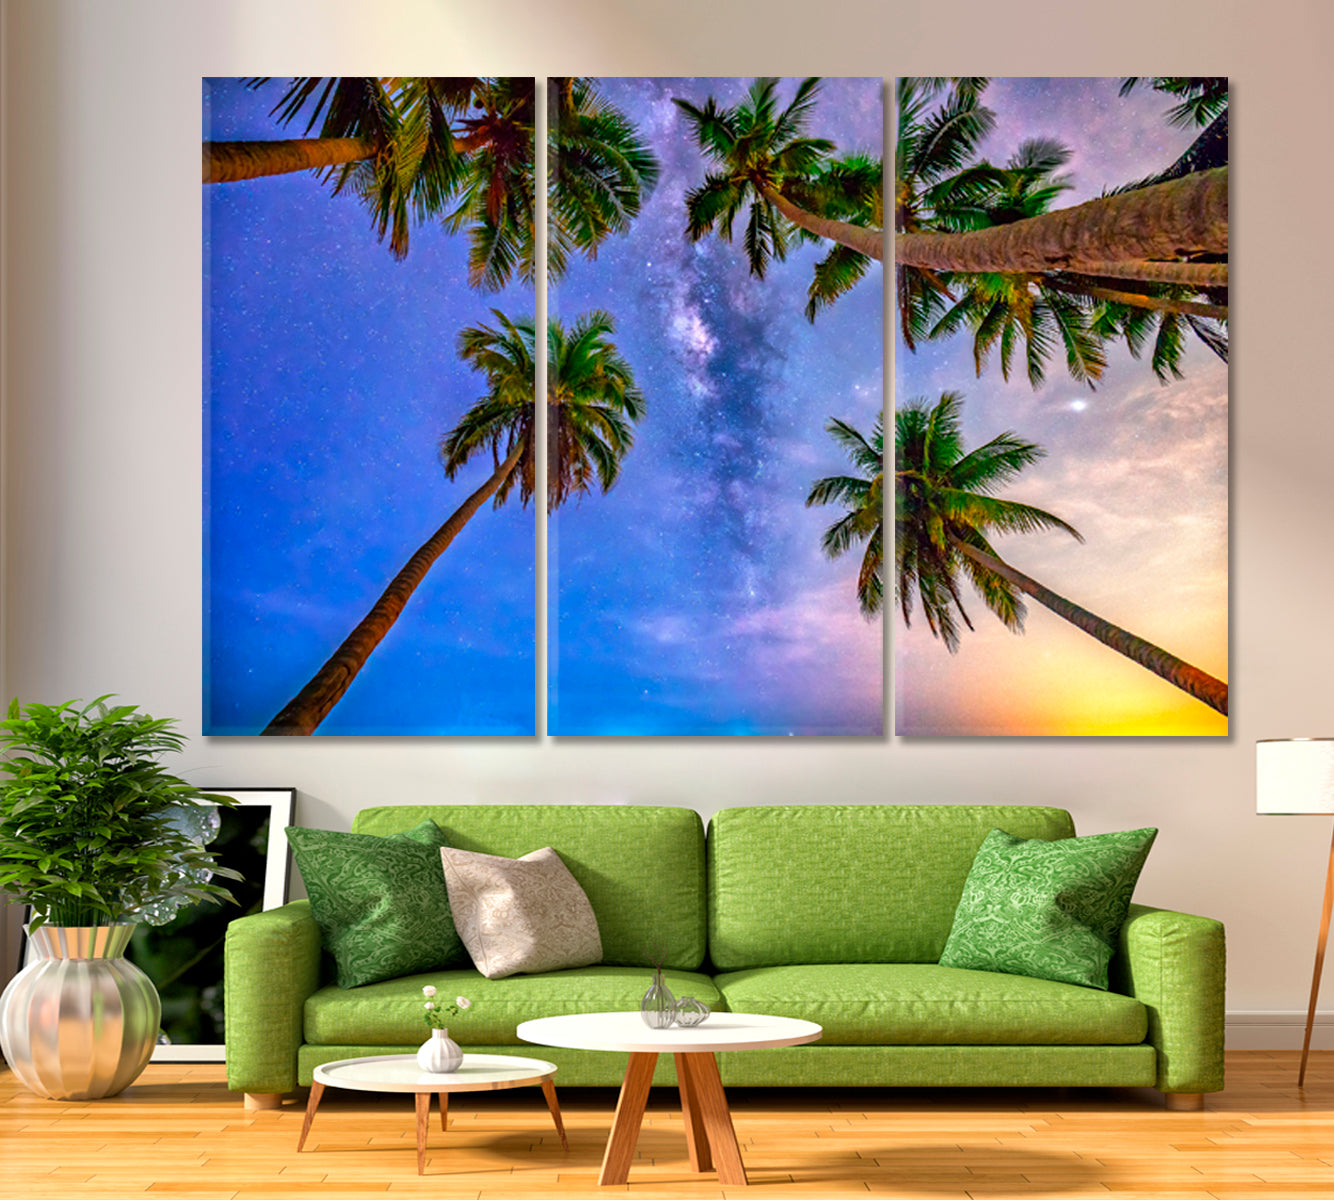 Coconut Palms Trees Milky Way Sky on a beautiful Summer Night Landscape Tropical, Exotic Art Print Artesty 3 panels 36" x 24" 